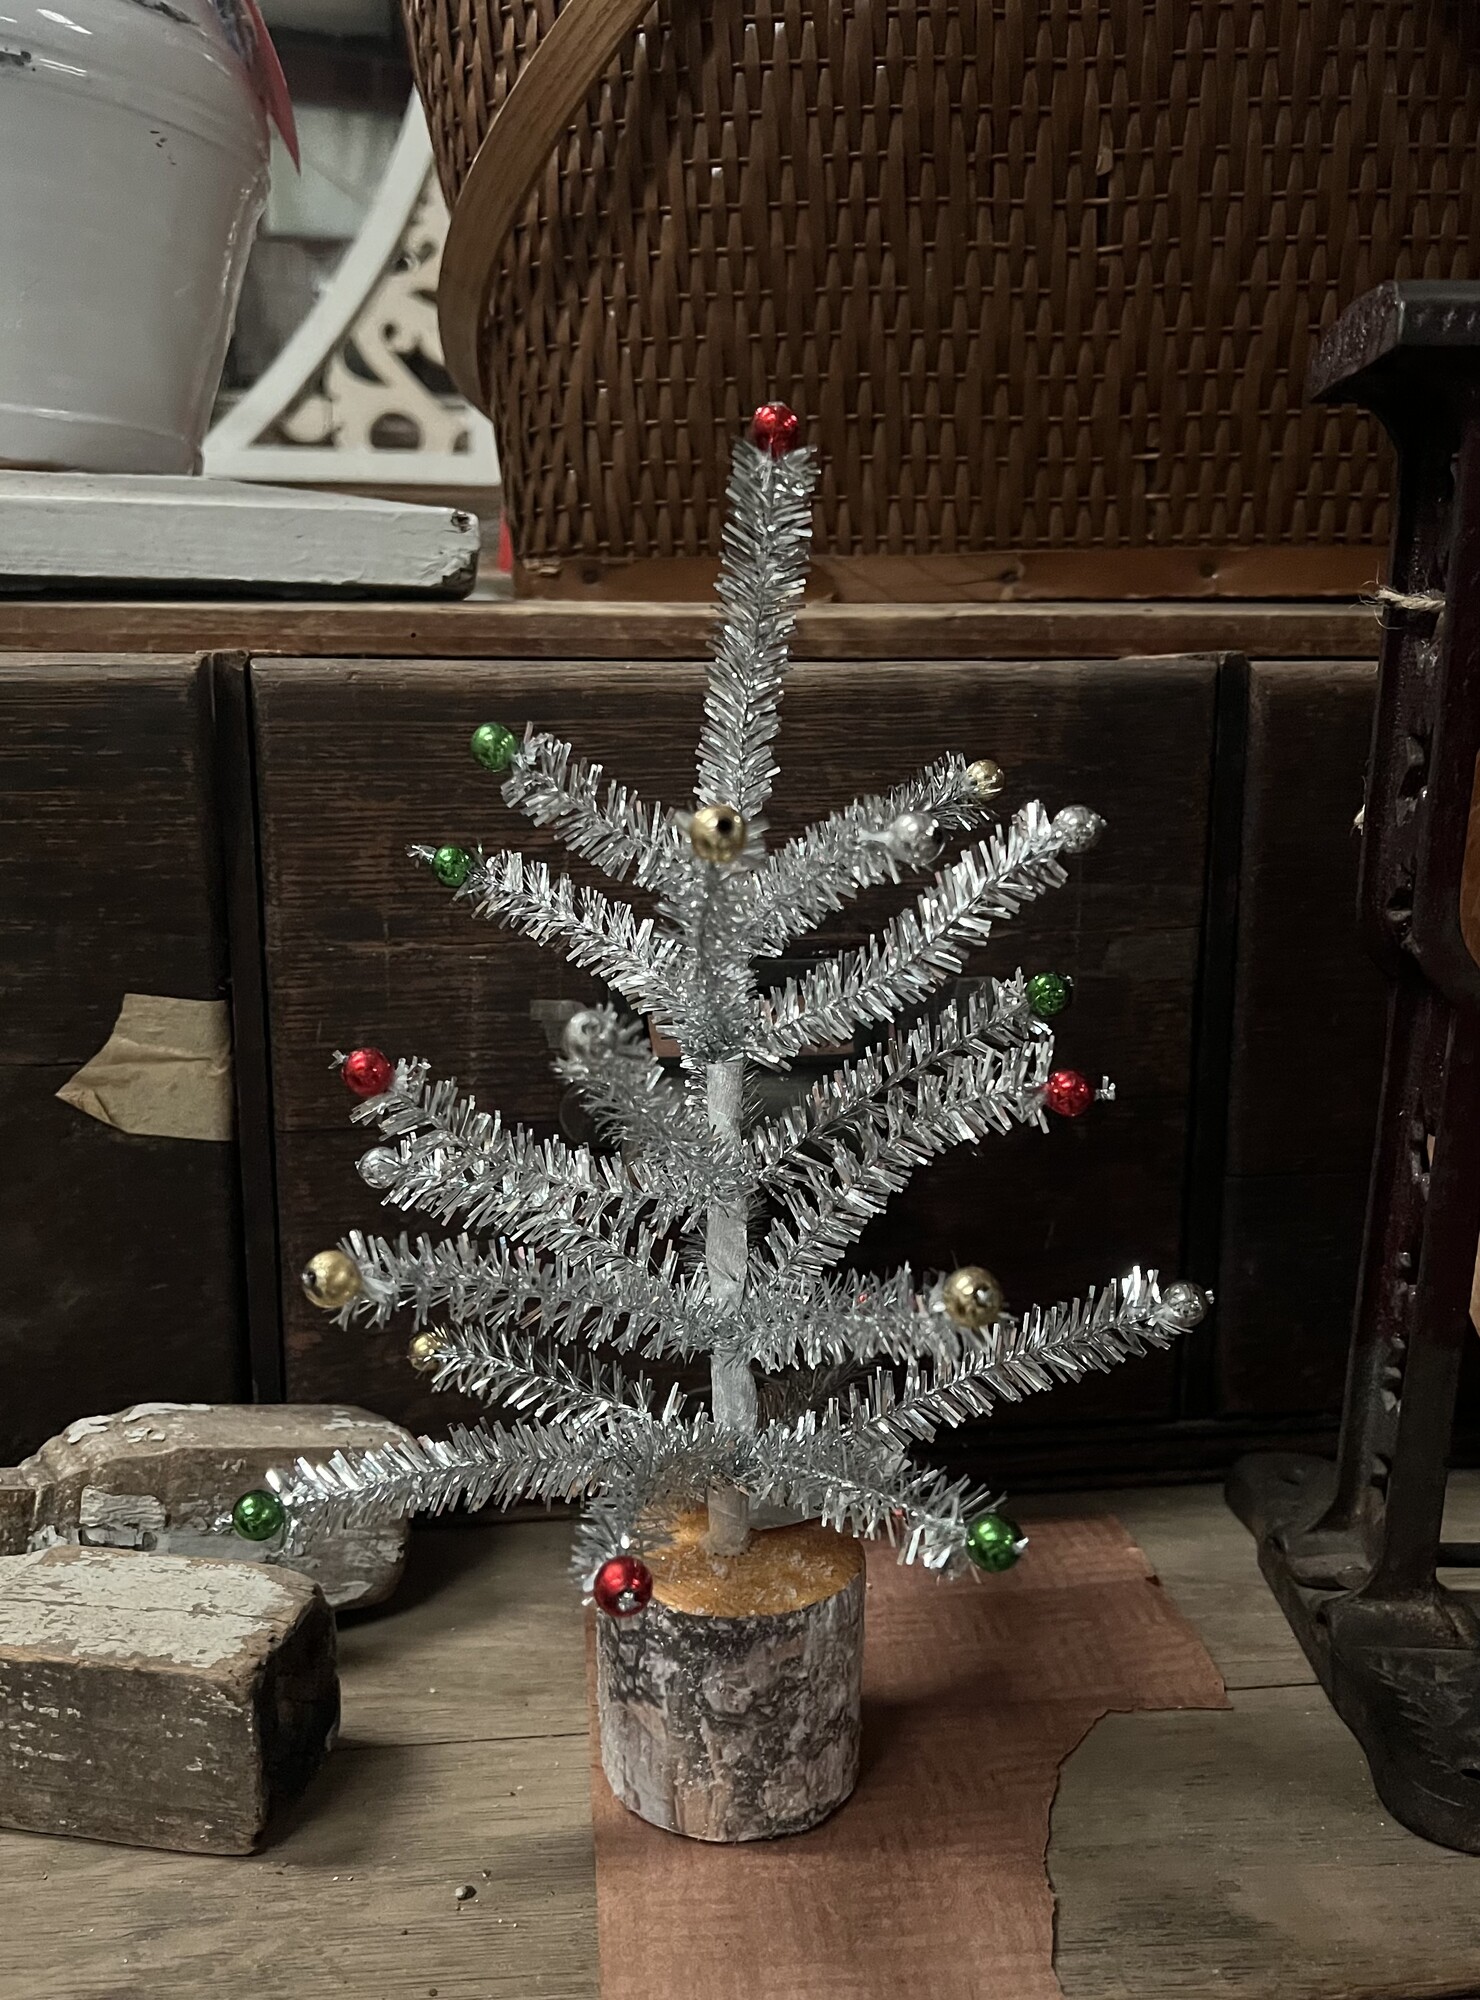 The Silver Tinsel Tree is a table top tree that features a paper wrapped base and silver tinsel foliage. Tree jis accented by red, green and gold baubles.
Tree measures 12 inches high